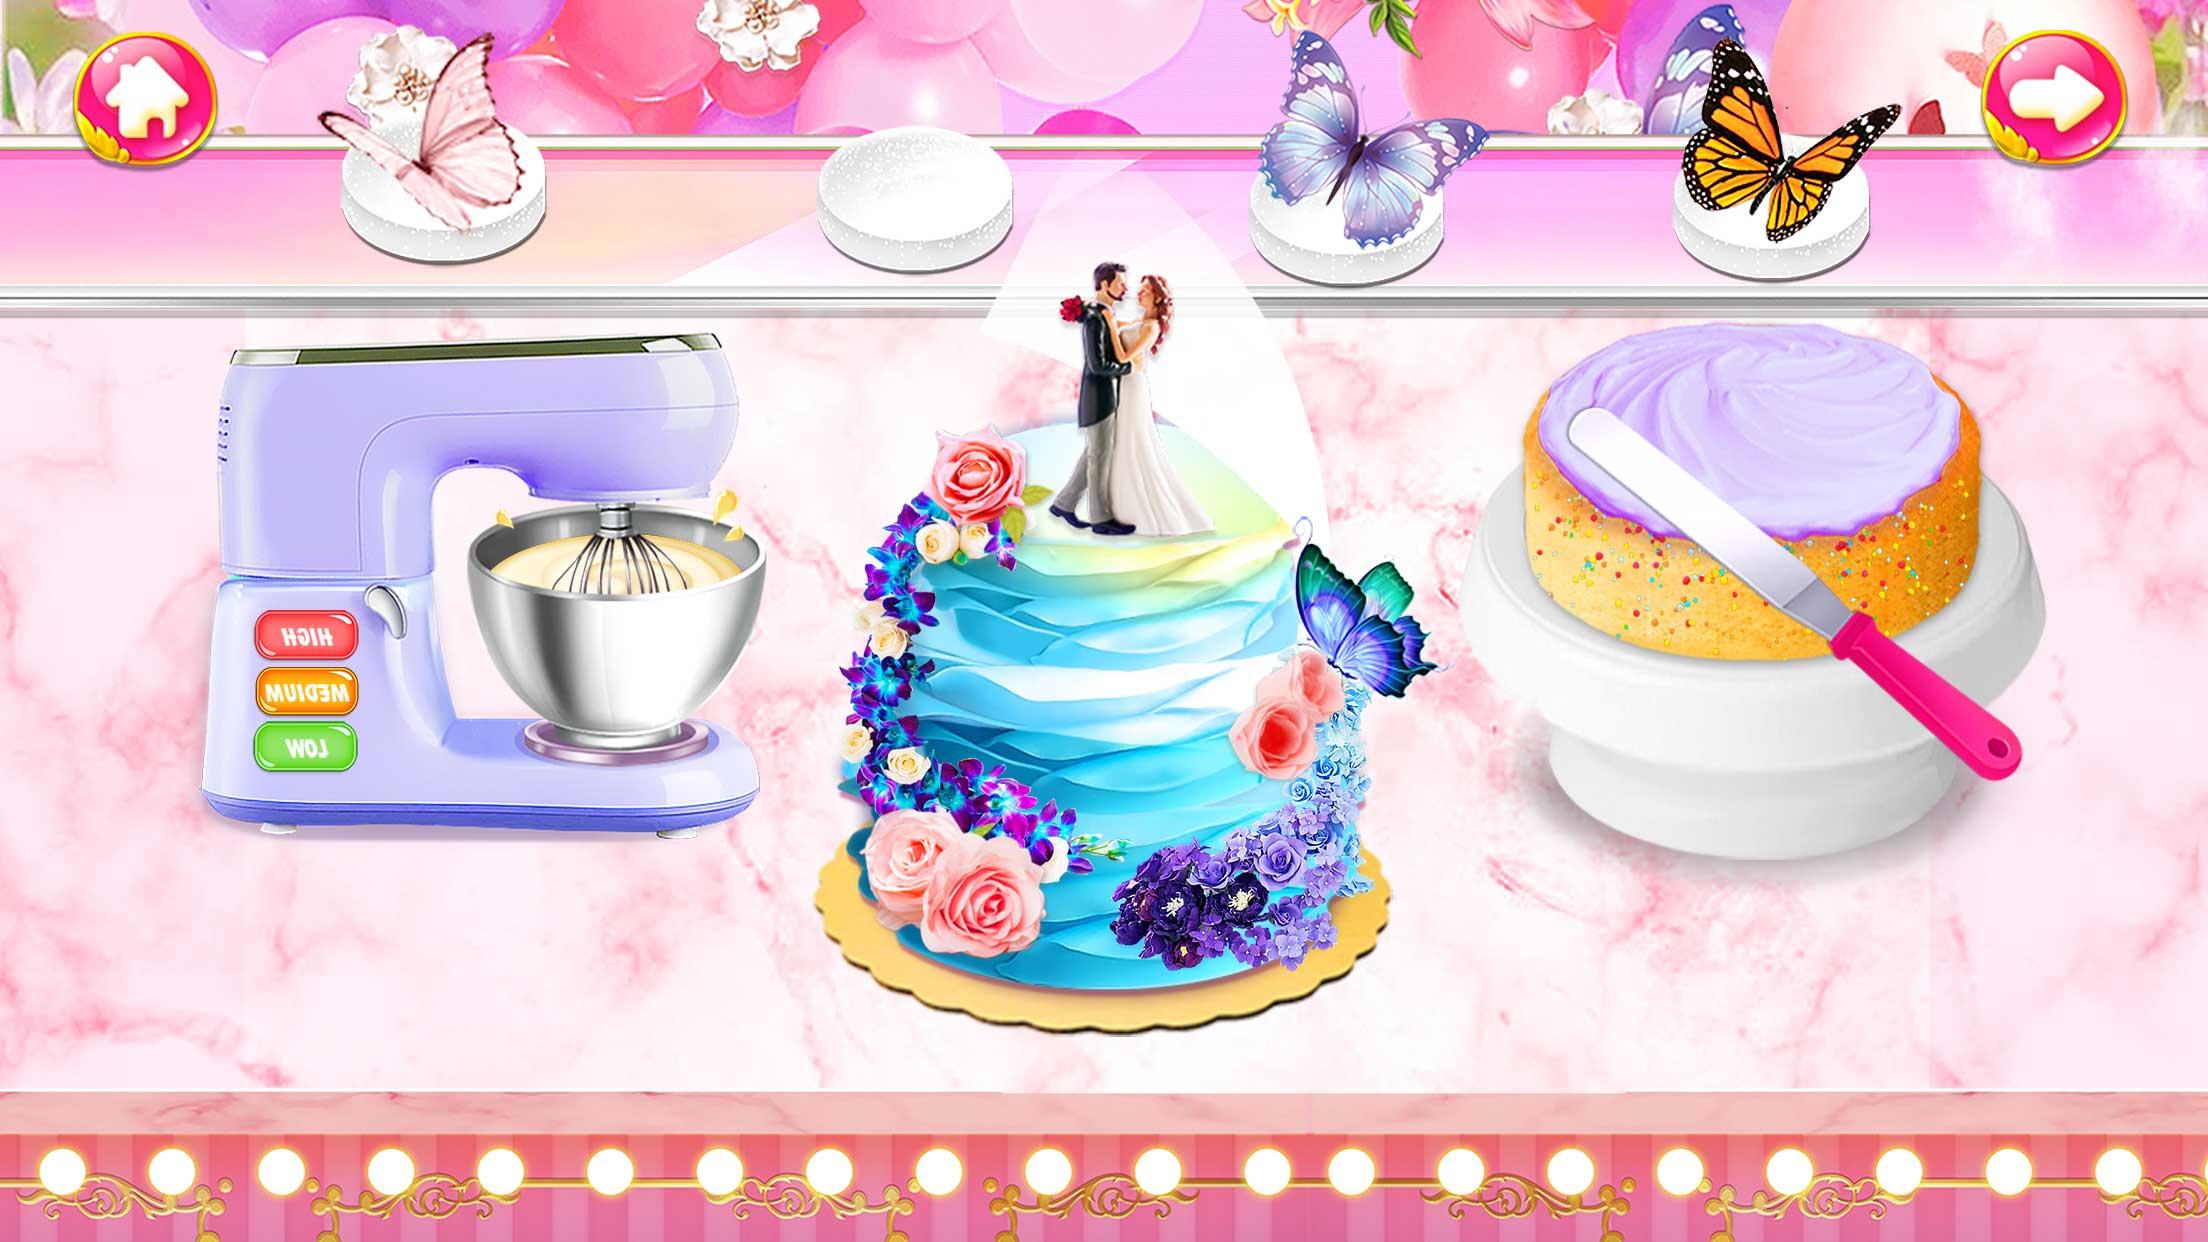 Beautiful Chocolate Cake Game - Play online at Y8.com